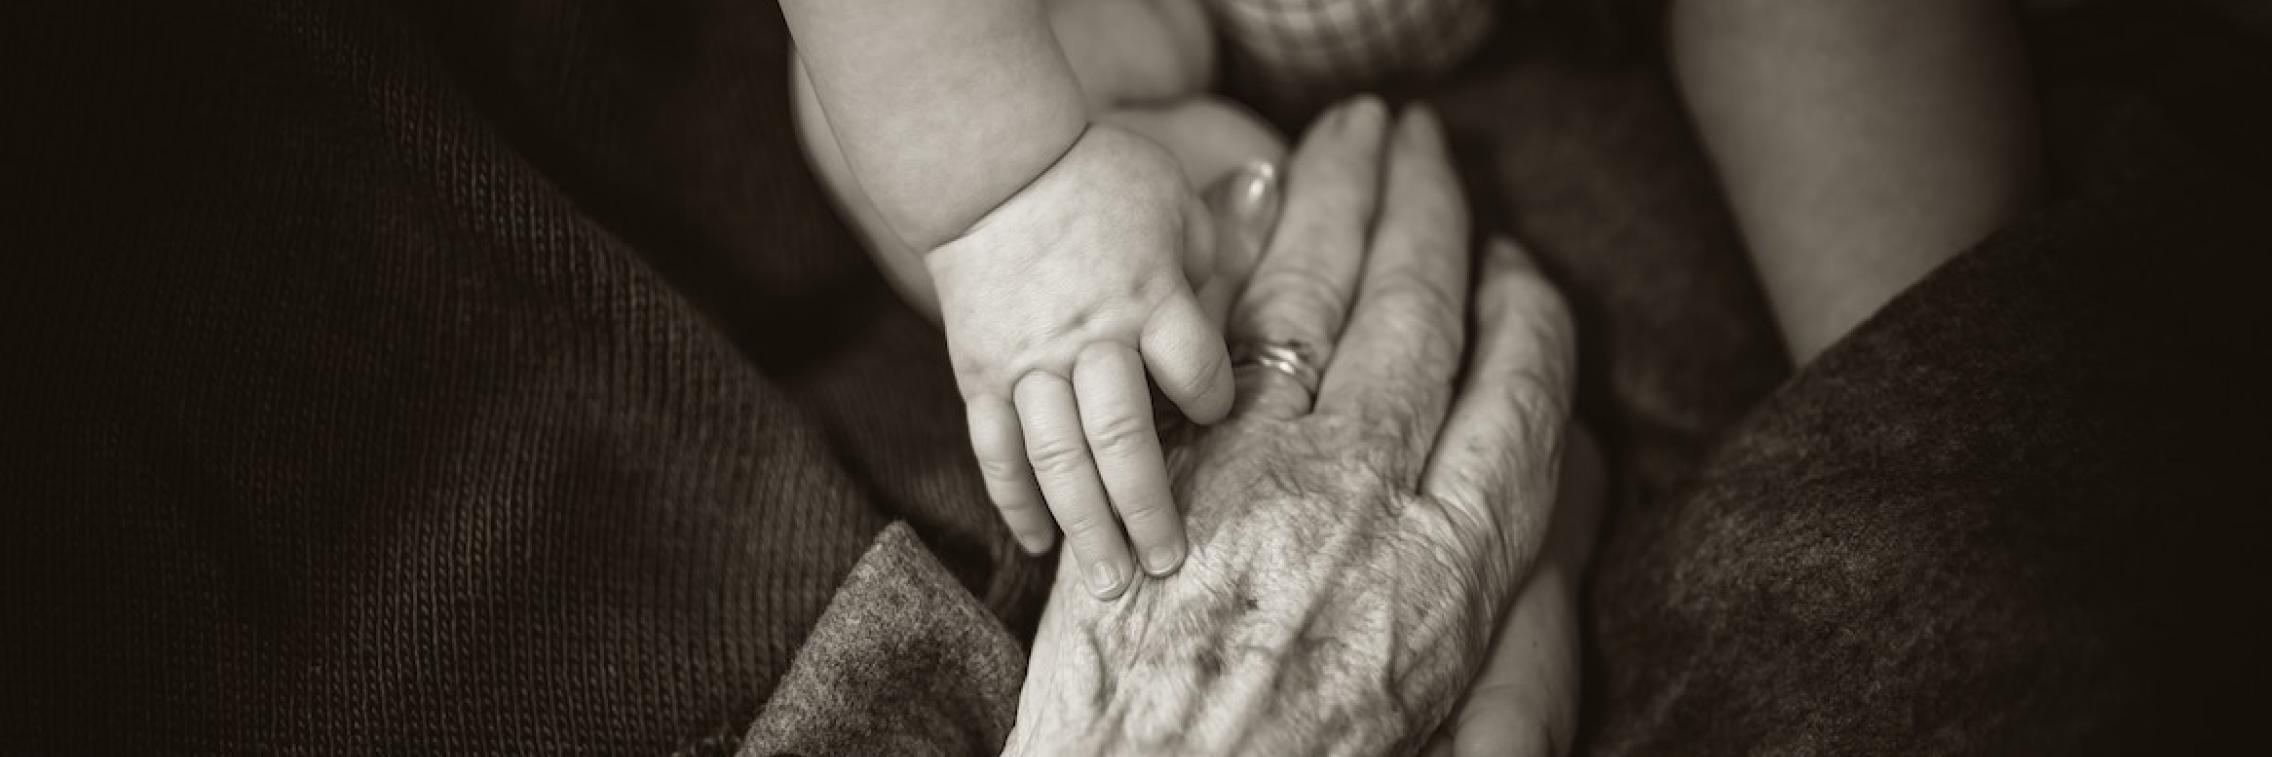 An elderly person holding hands with an infant.